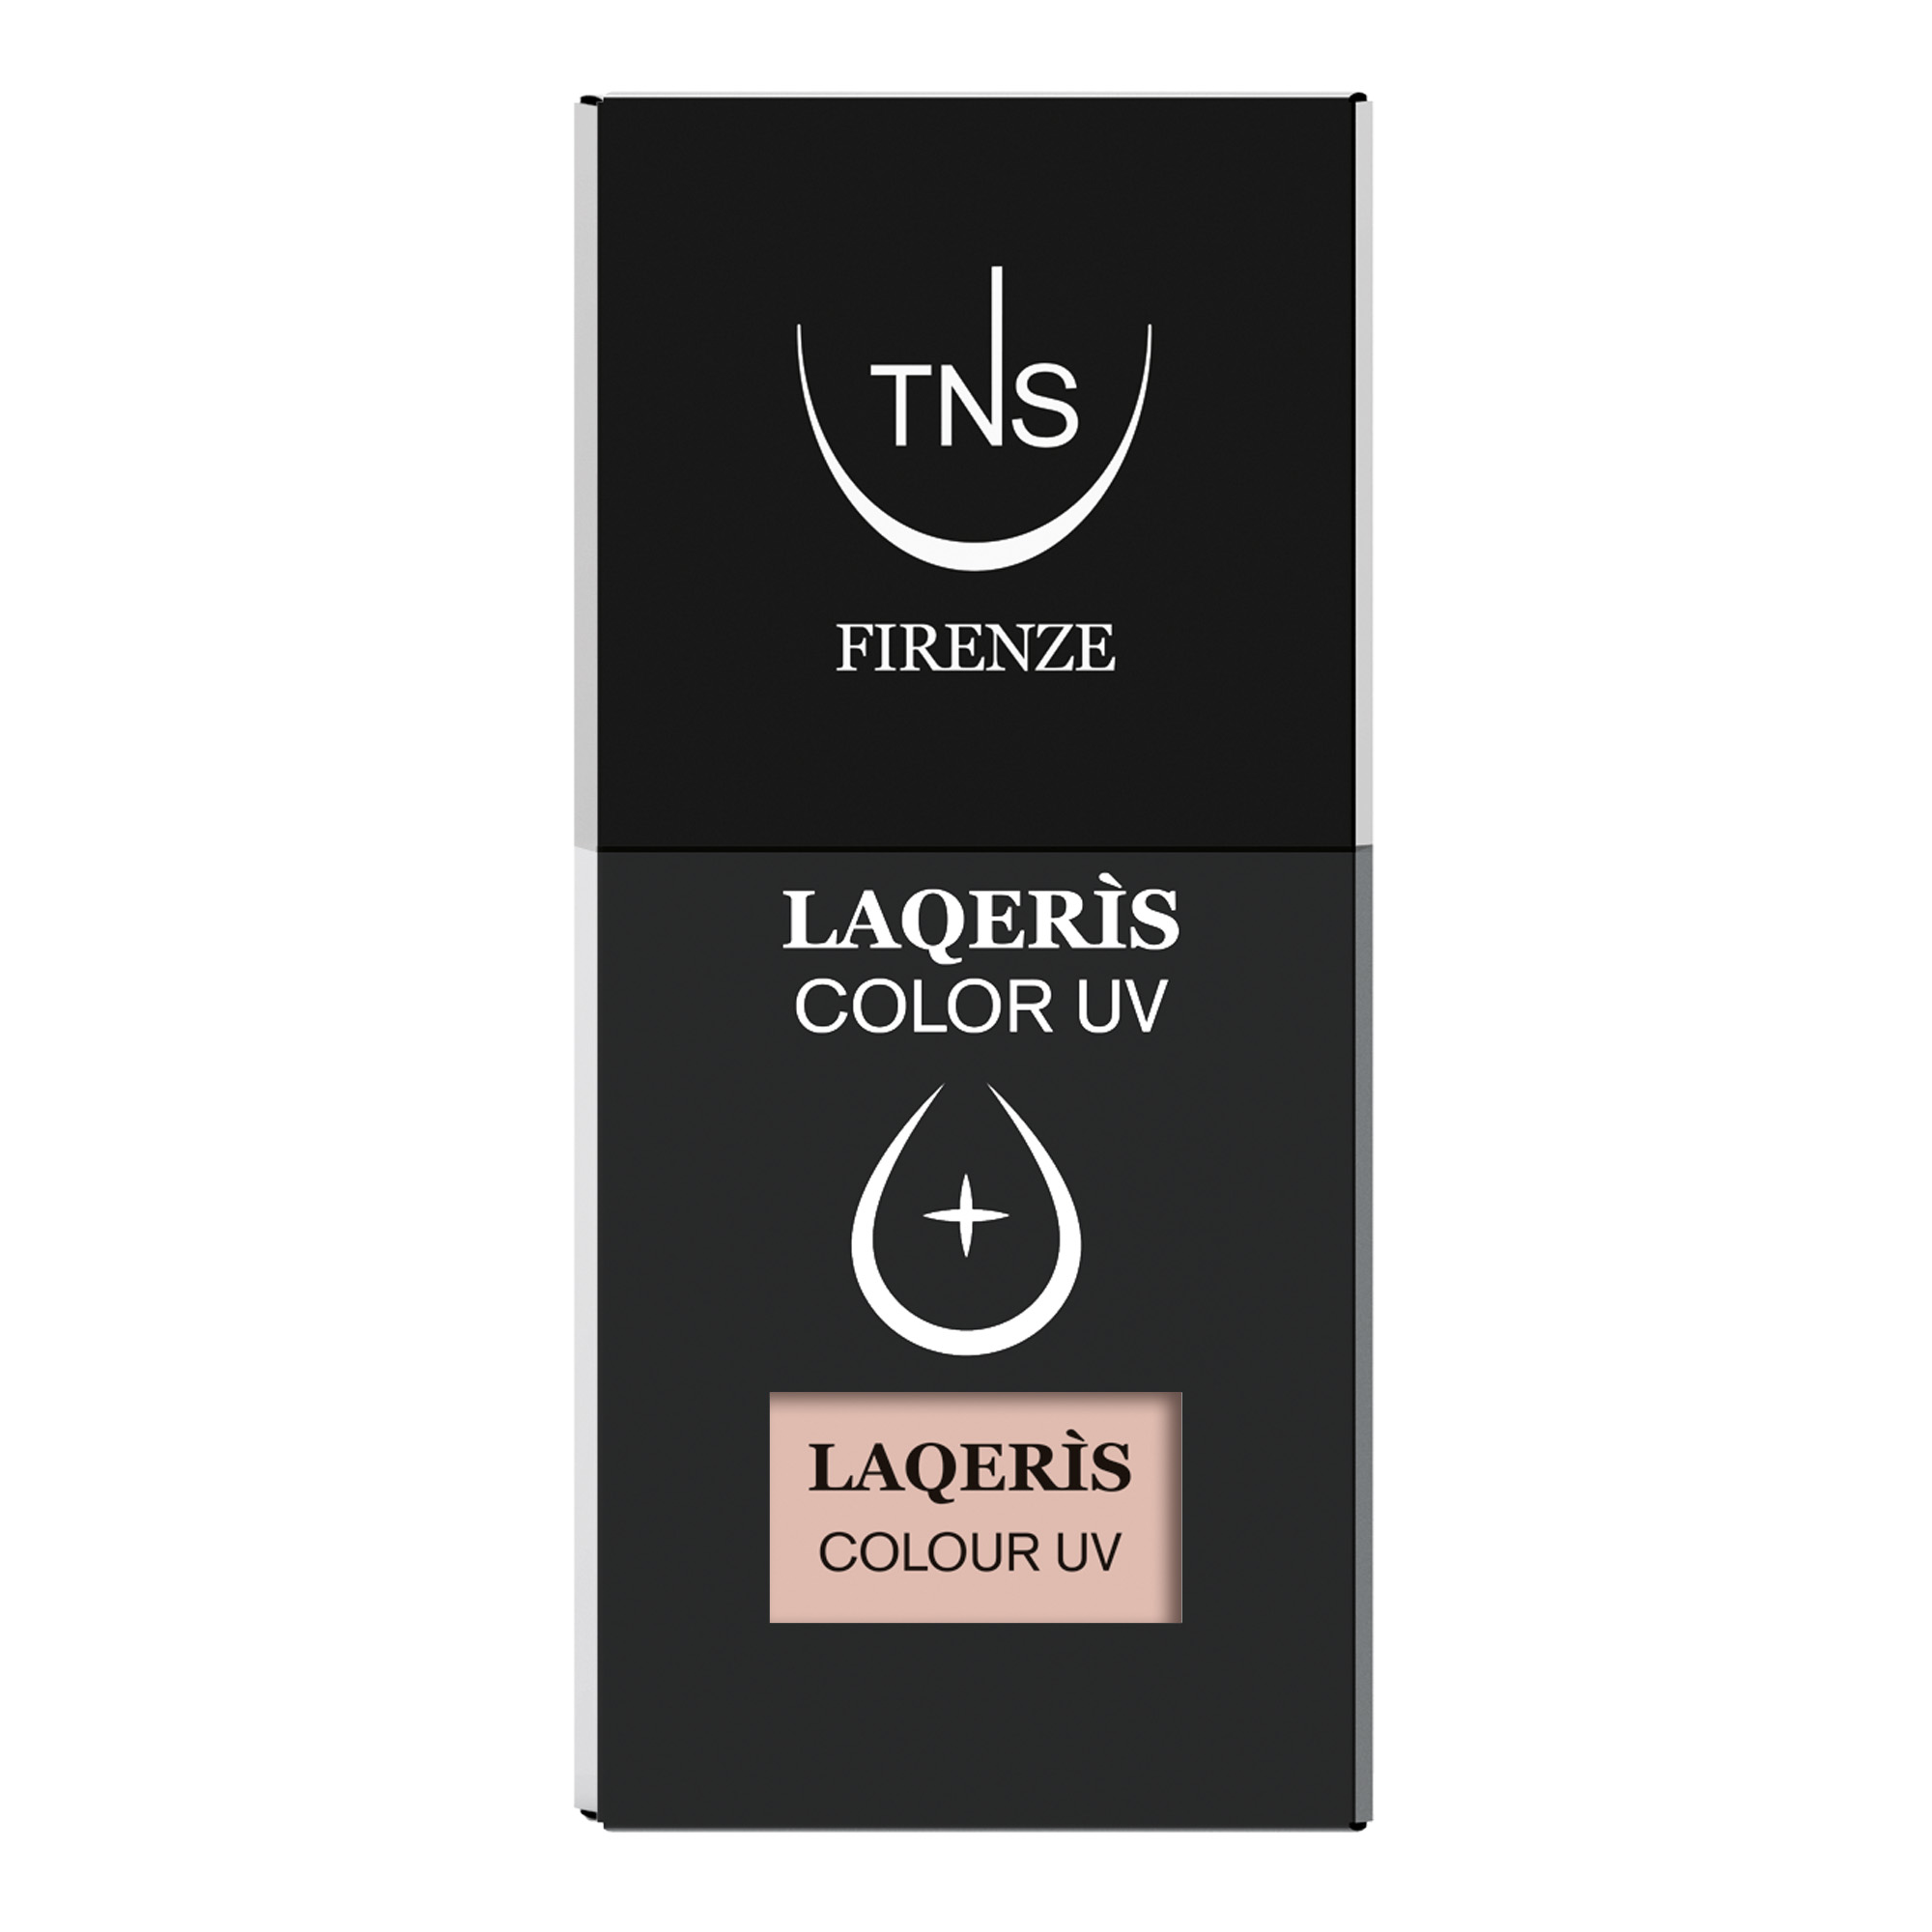 Vernis à ongles semi-permanent rose nude clair Light Touch 10 ml Laqerìs TNS